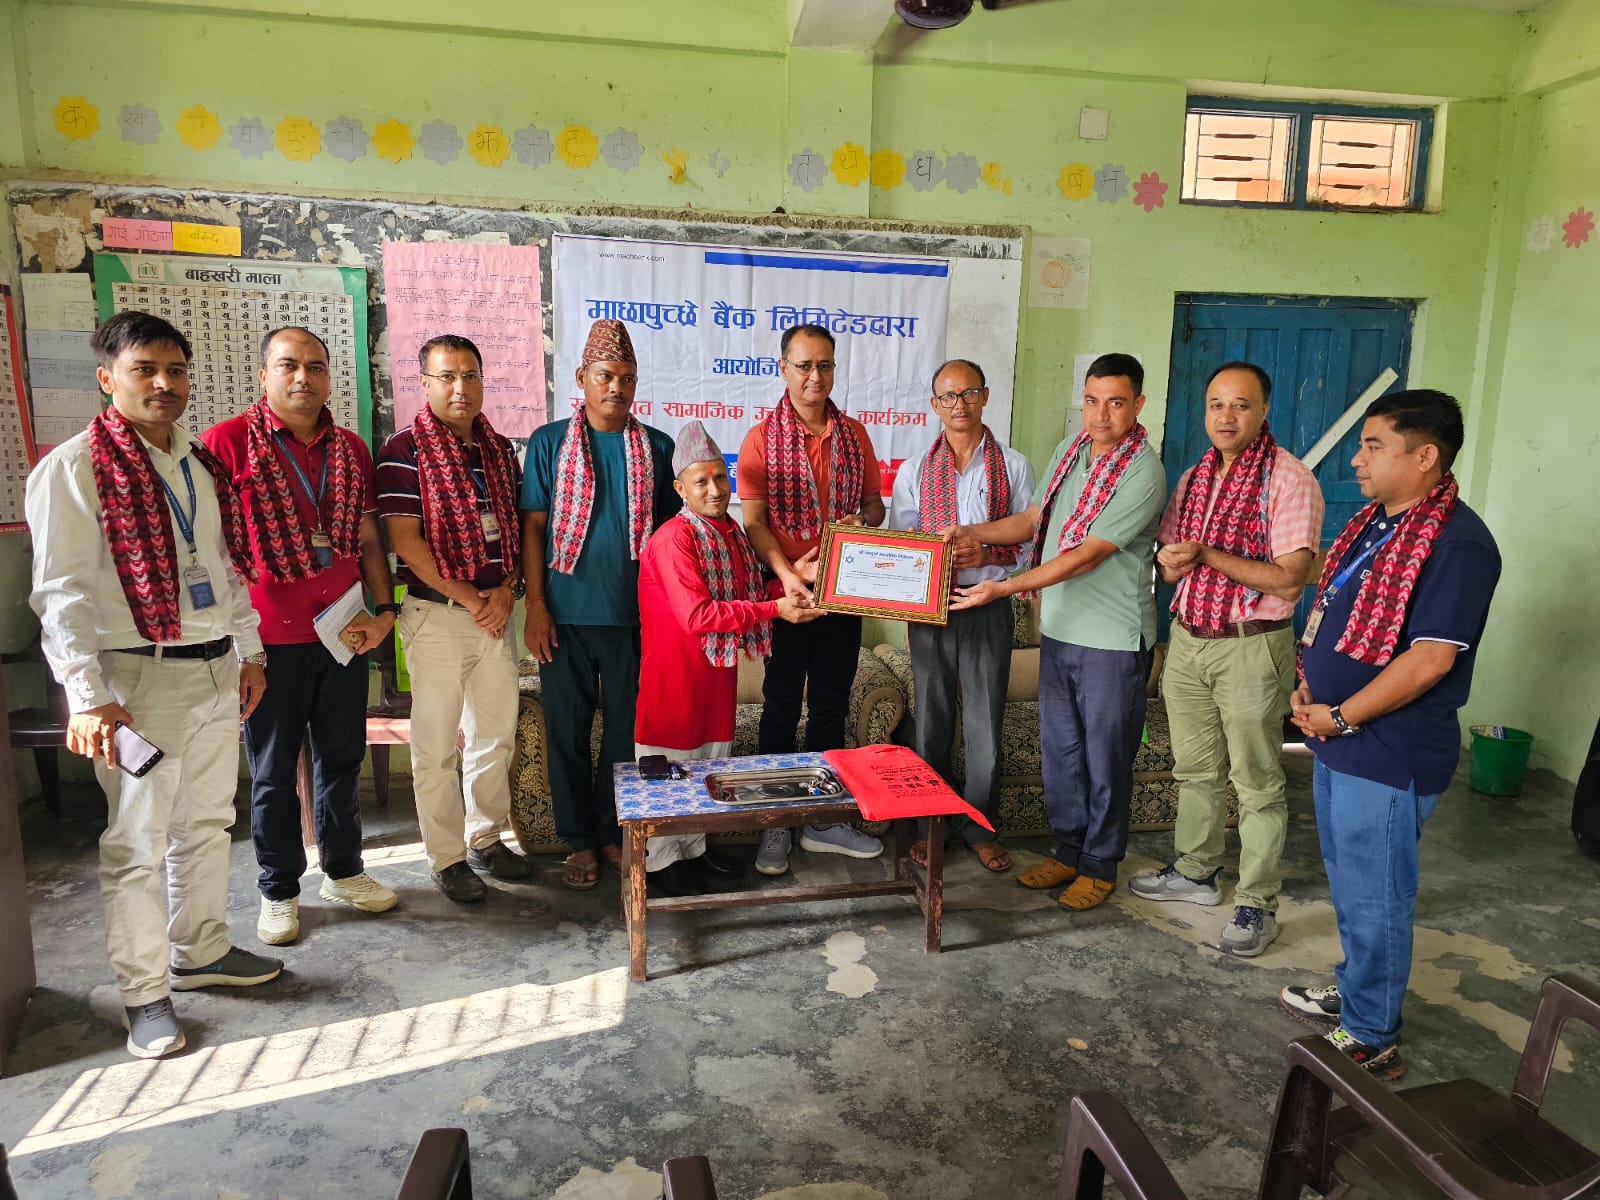 Machhapuchhre Bank provides drinking water service to school in Kailali district